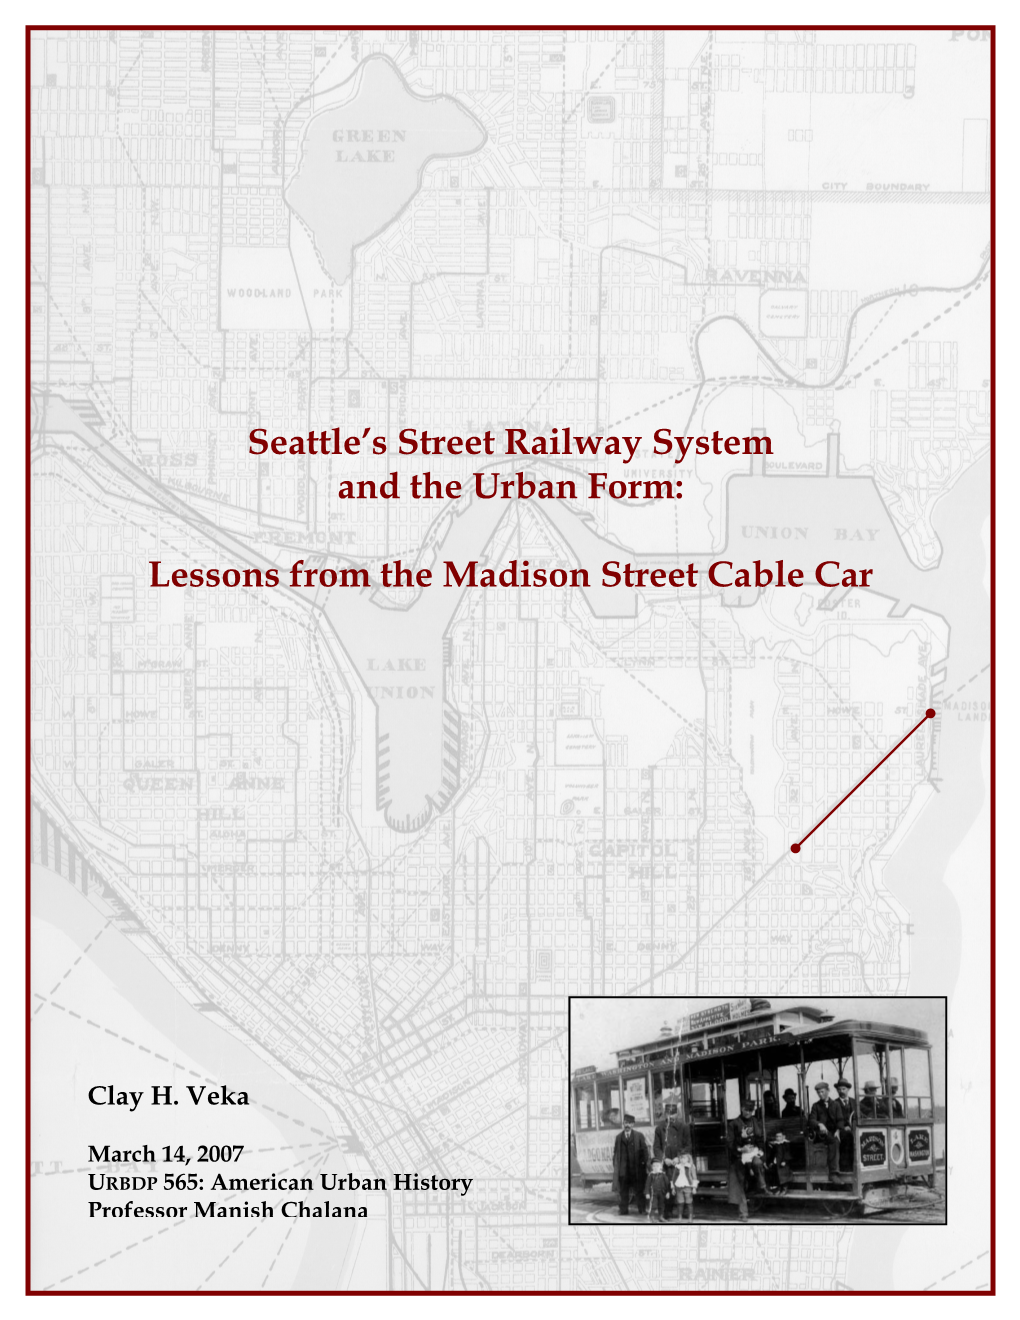 Seattle's Street Railway System and the Urban Form: Lessons from the Madison Street Cable